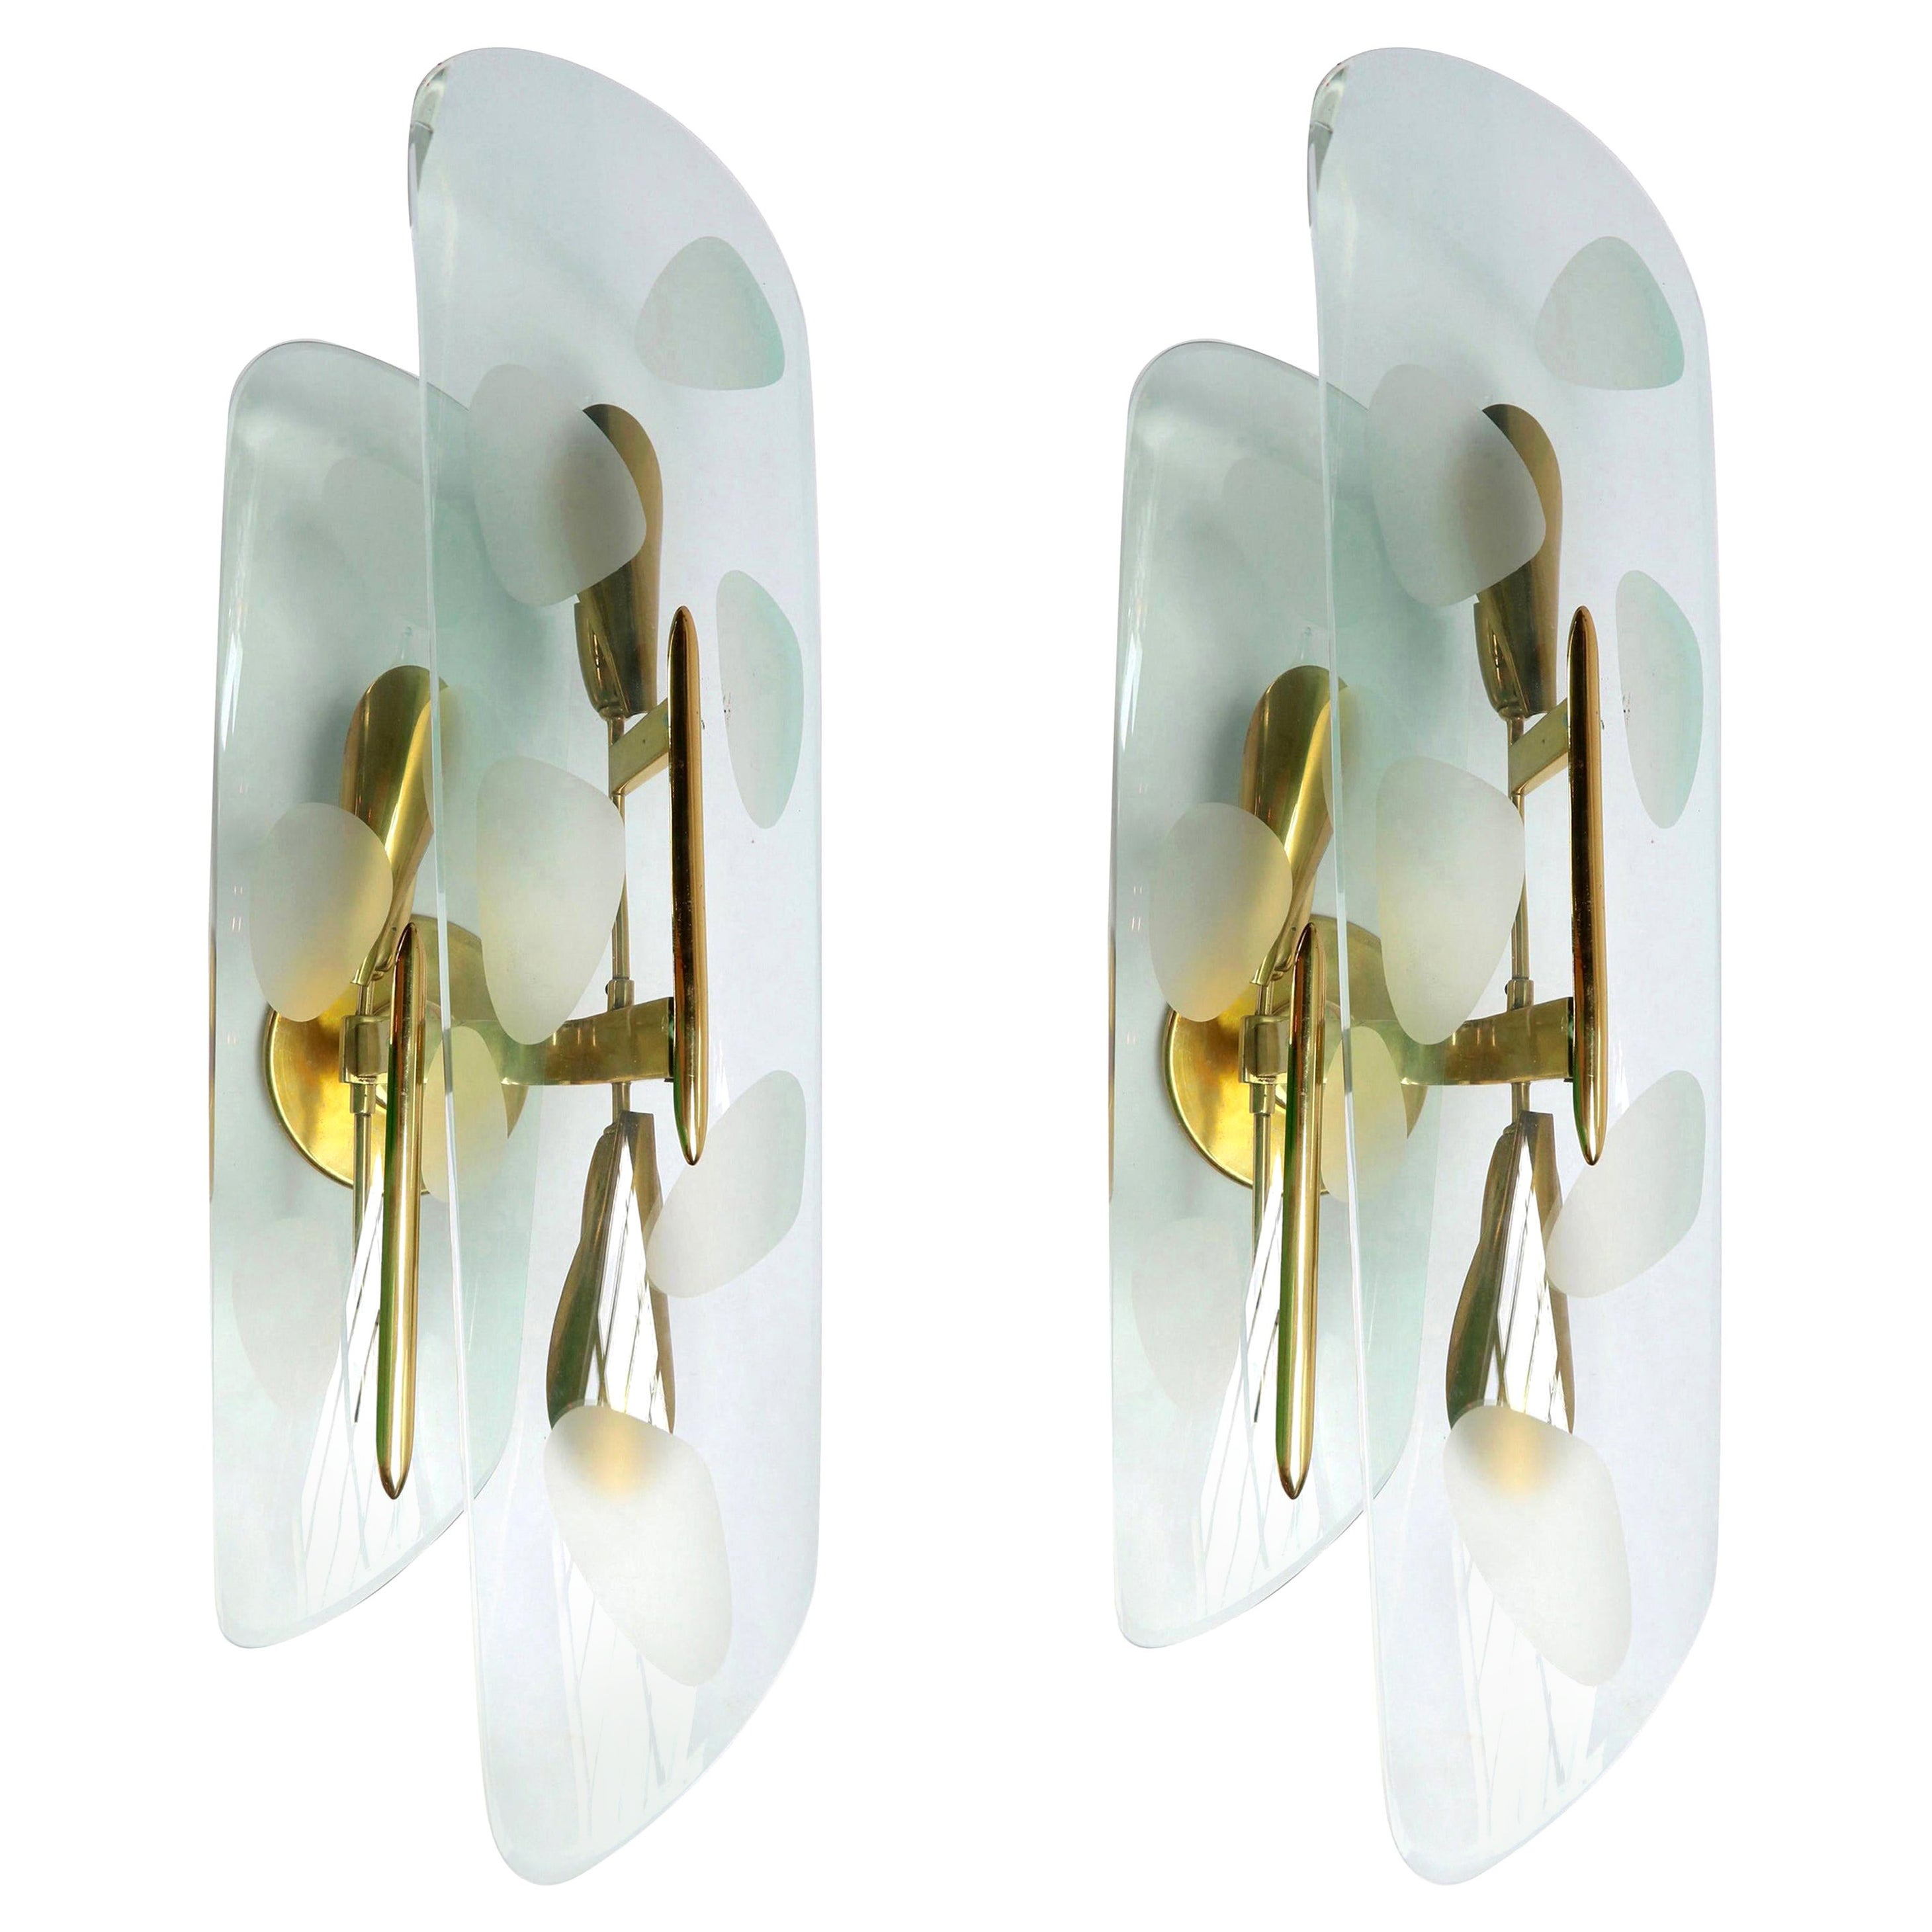 Pair of 1950s Italian Sconces with Etched Glass and Brass Frames